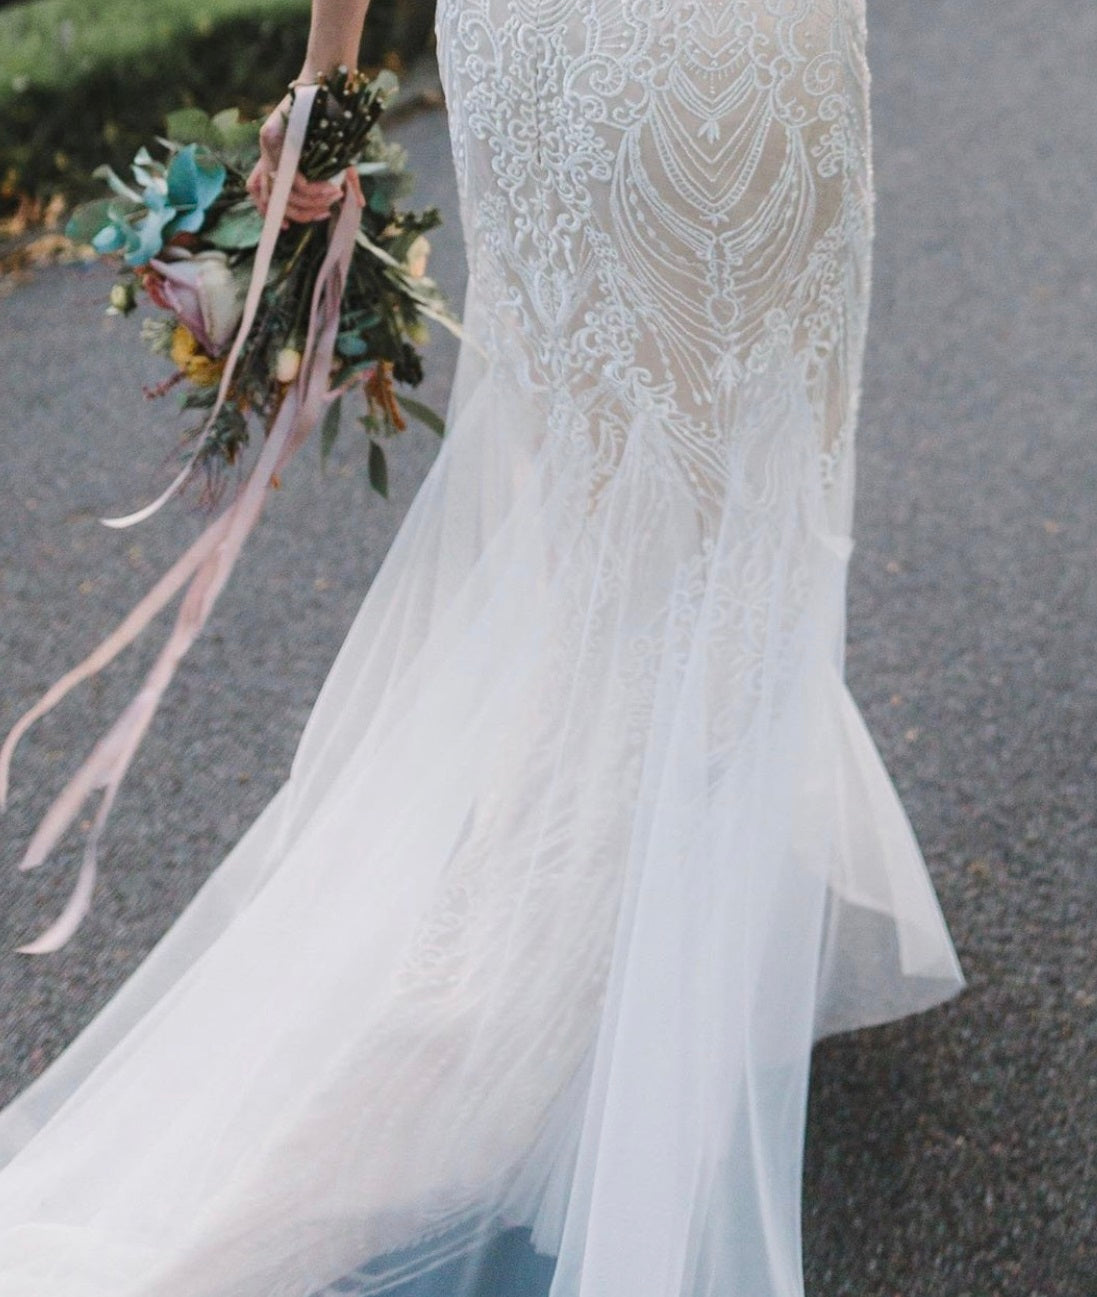 Ivory wedding dress using embroidered lace Blanche 4